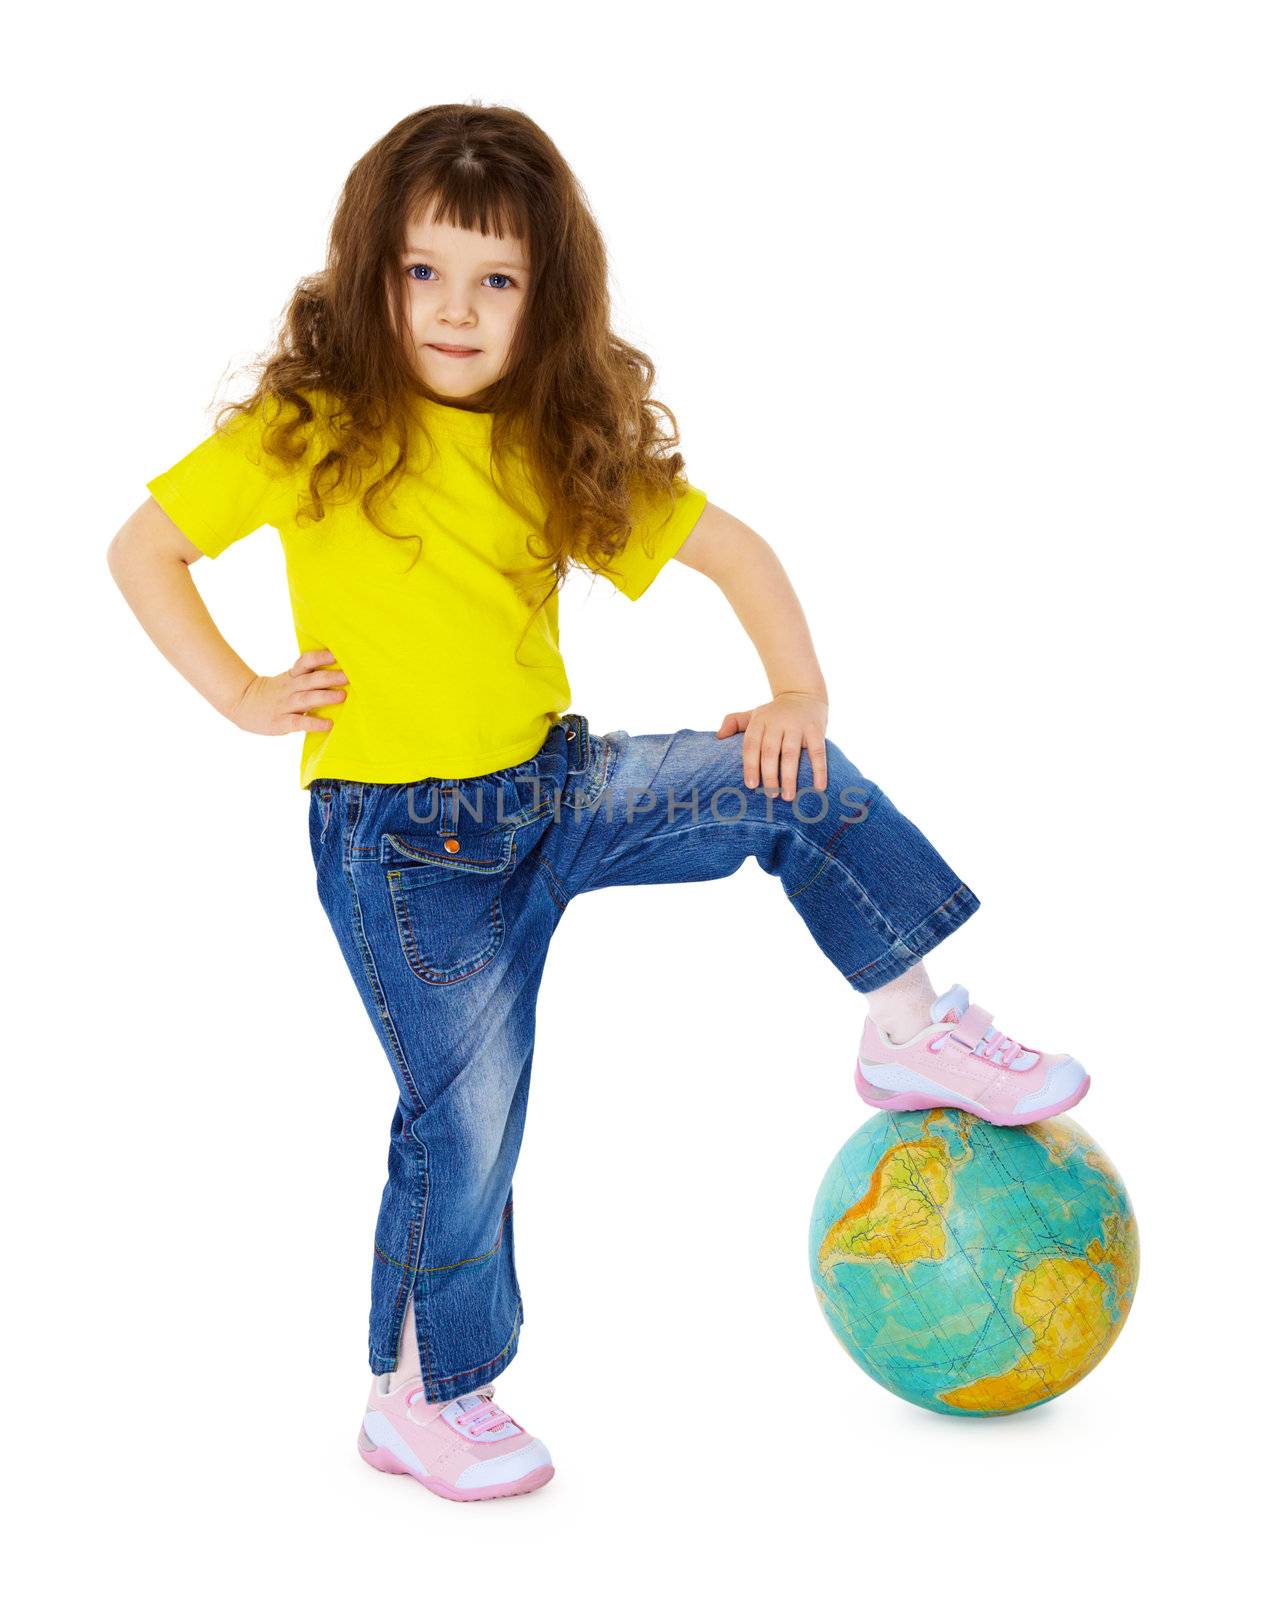 The little girl put her foot on the geographic globe isolated on white background